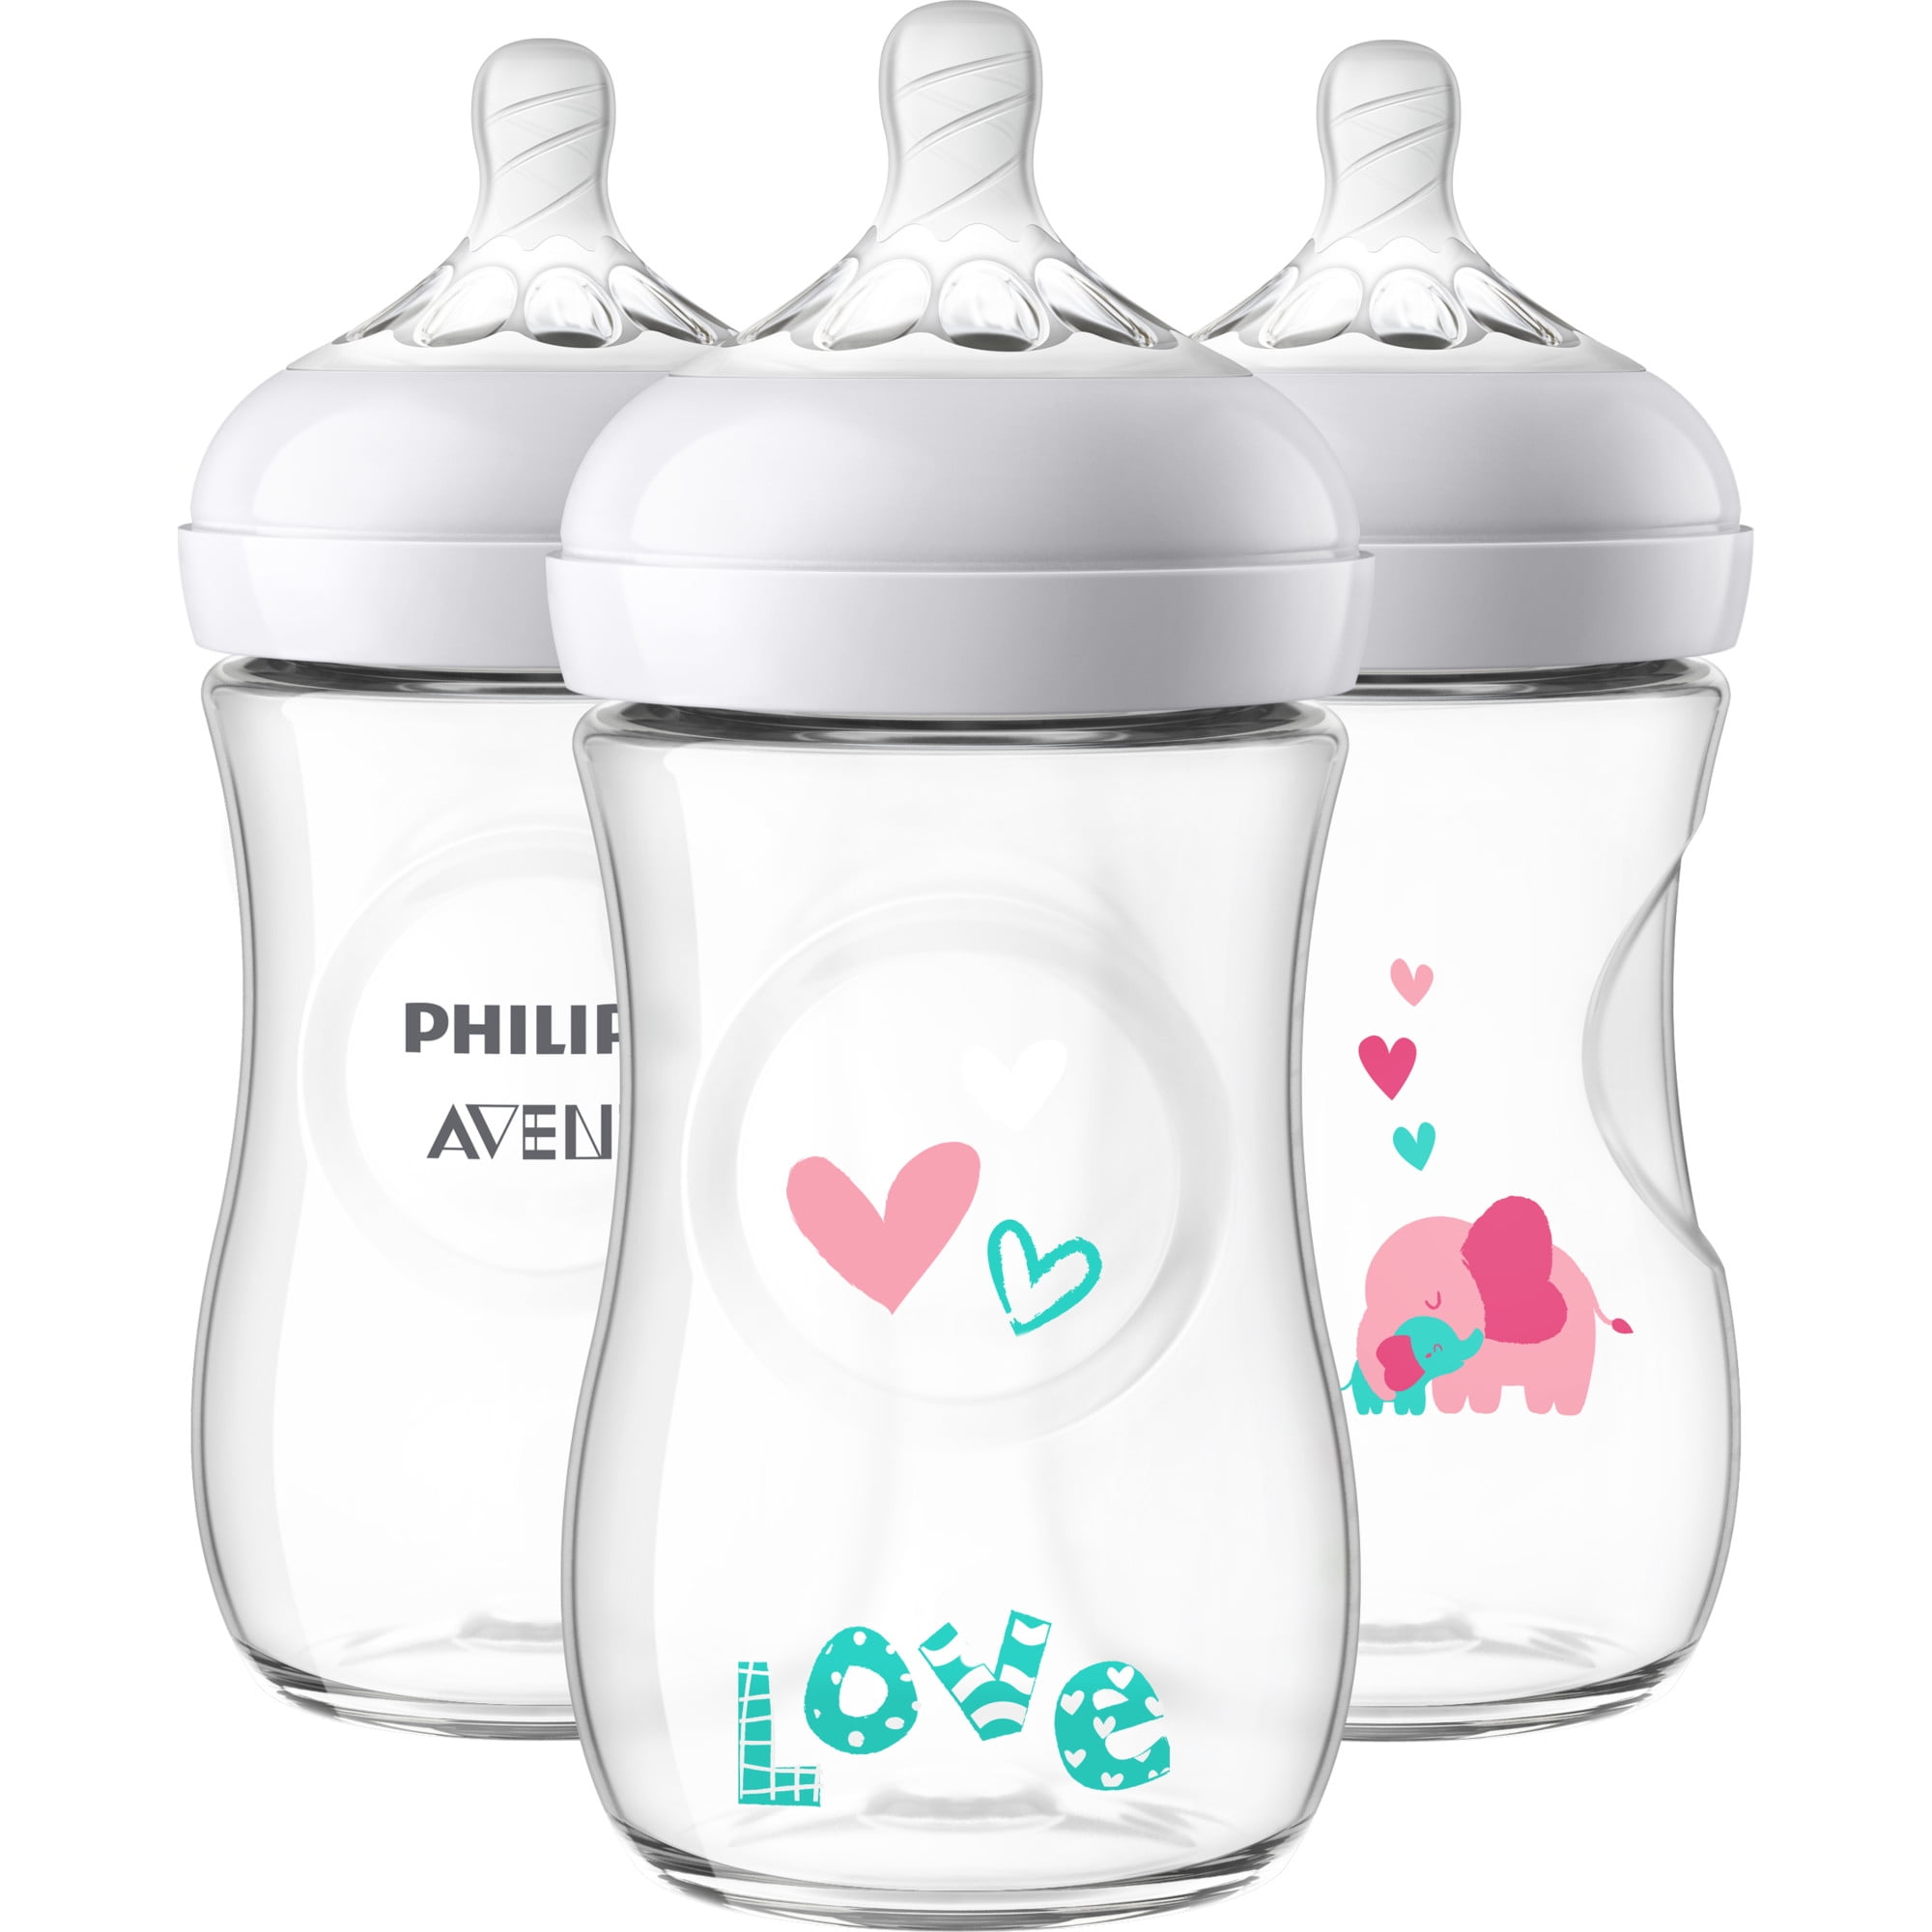 avent bottles with design